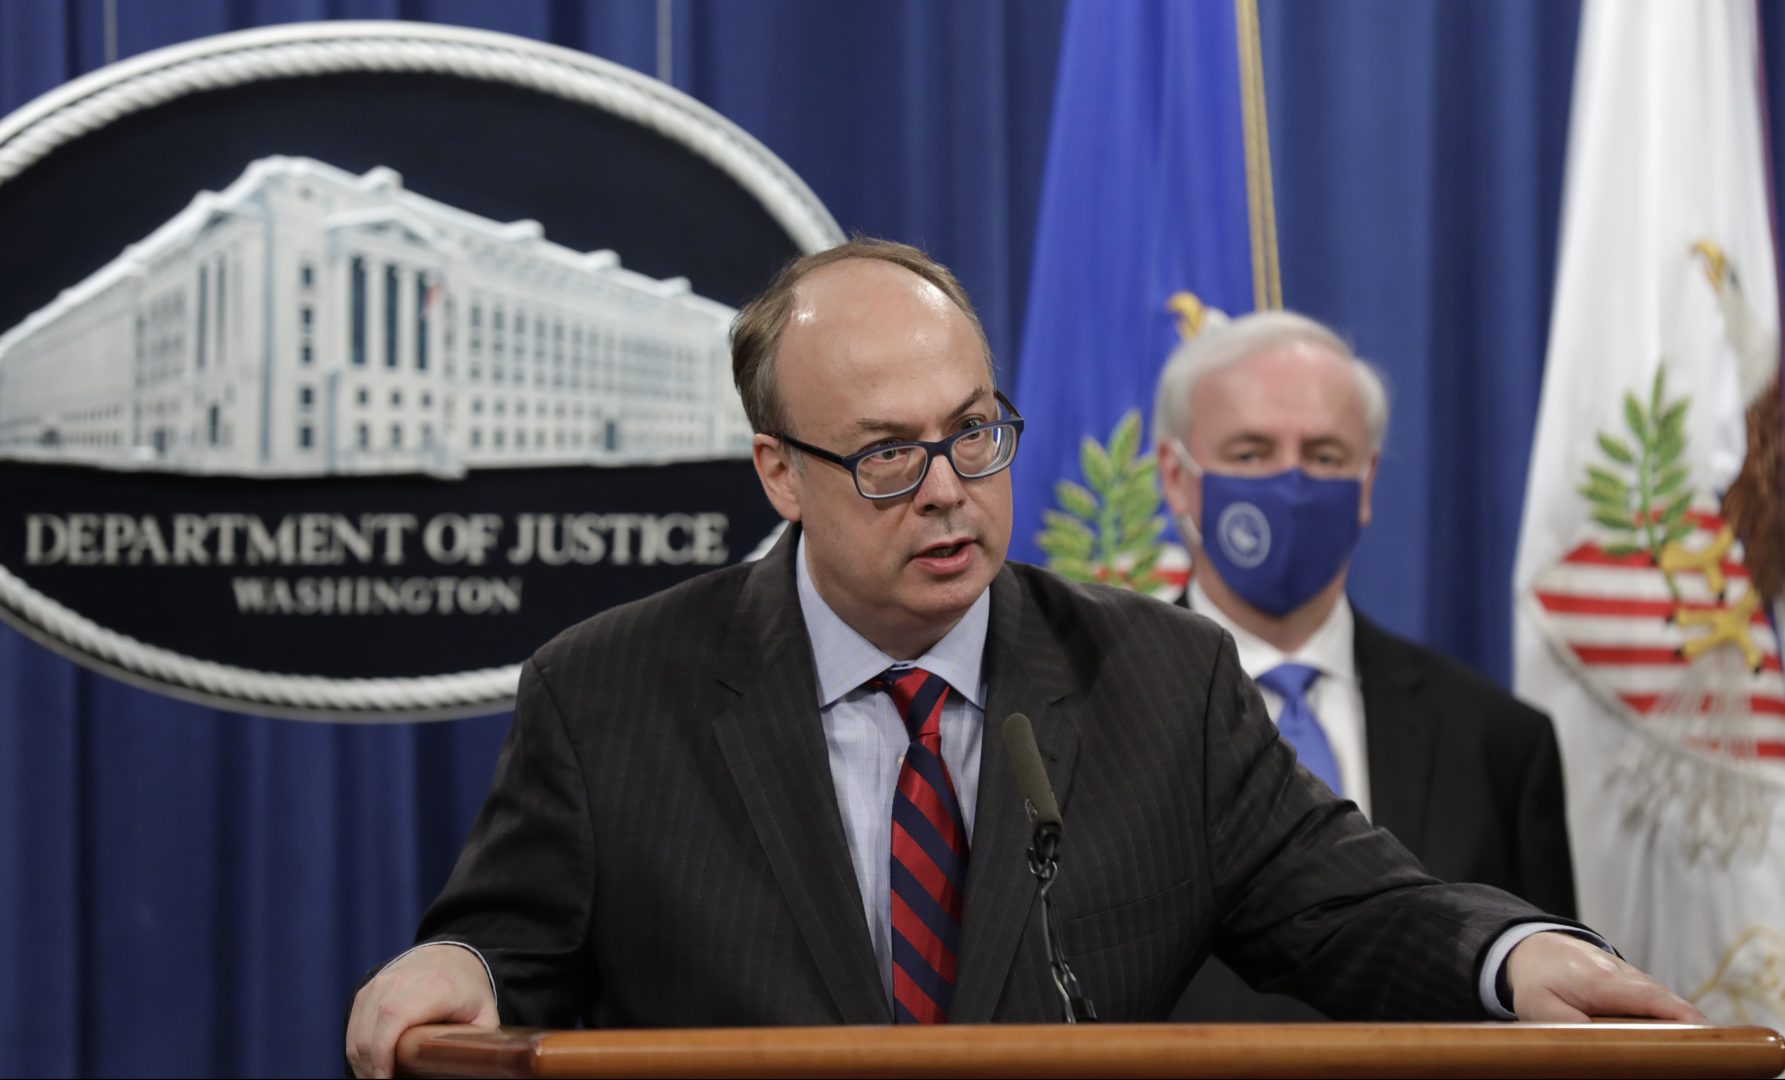 Acting Assistant U.S. Attorney General Jeffrey Clark is under scrutiny for his role in former President Donald Trump's efforts to overturn his 2020 election loss. In this file photo, Clark is shown next to Deputy Attorney General Jeffrey A. Rosen during a news conference to announce the results of the global resolution of criminal and civil investigations with an opioid manufacturer at the Justice Department in Washington, Wednesday, Oct. 21, 2020.